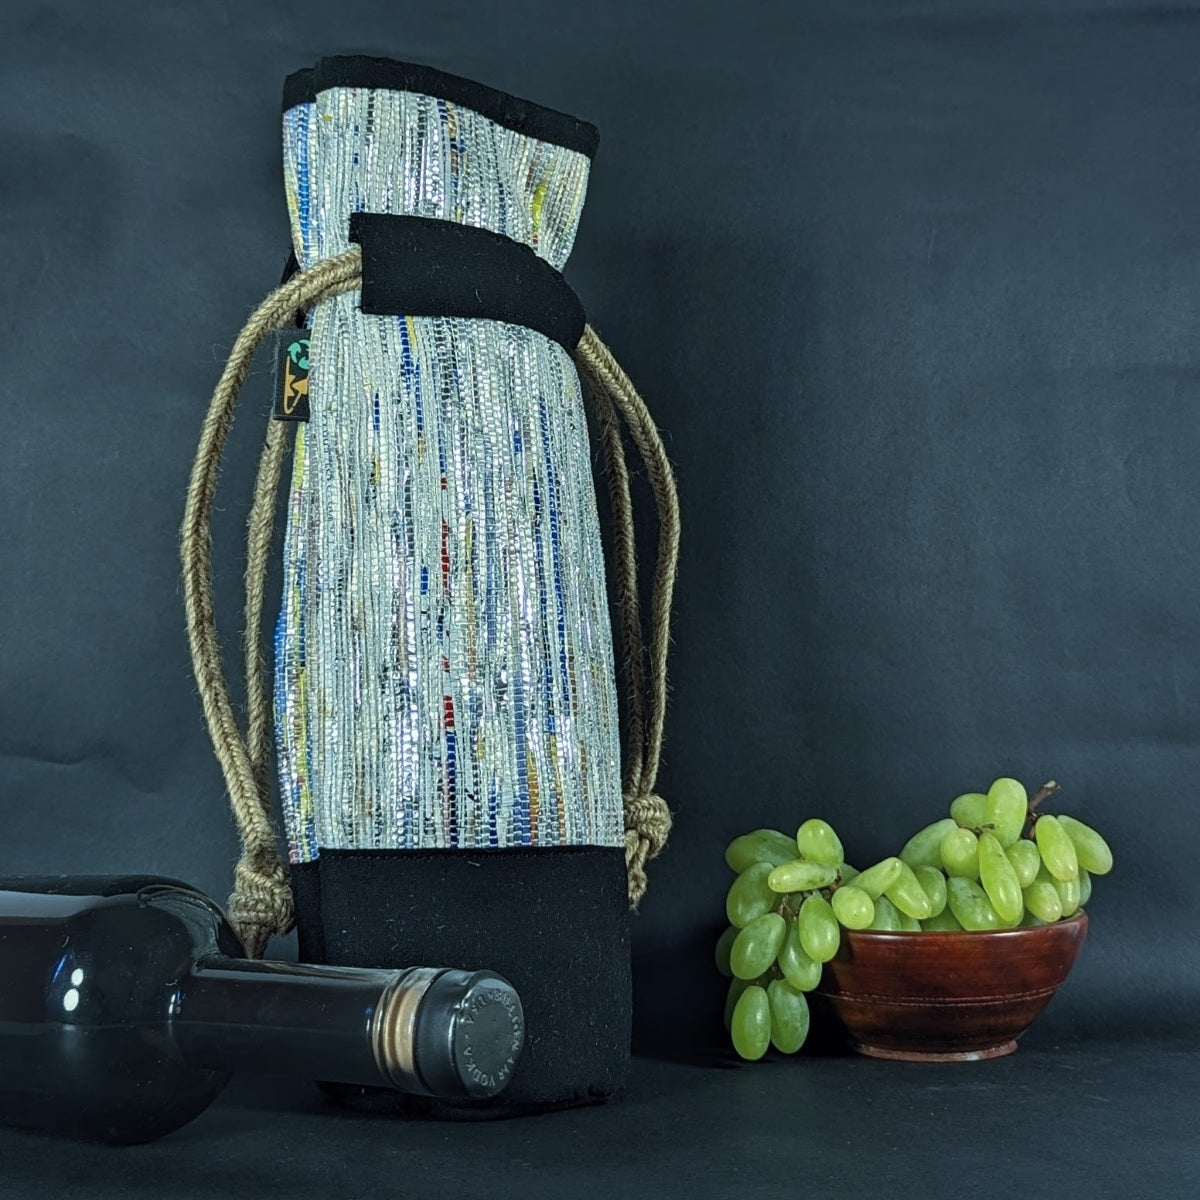 (WB0224-102) Silver Glitter with Bluish Tinge Upcycled Handwoven Wine Bottle Holder